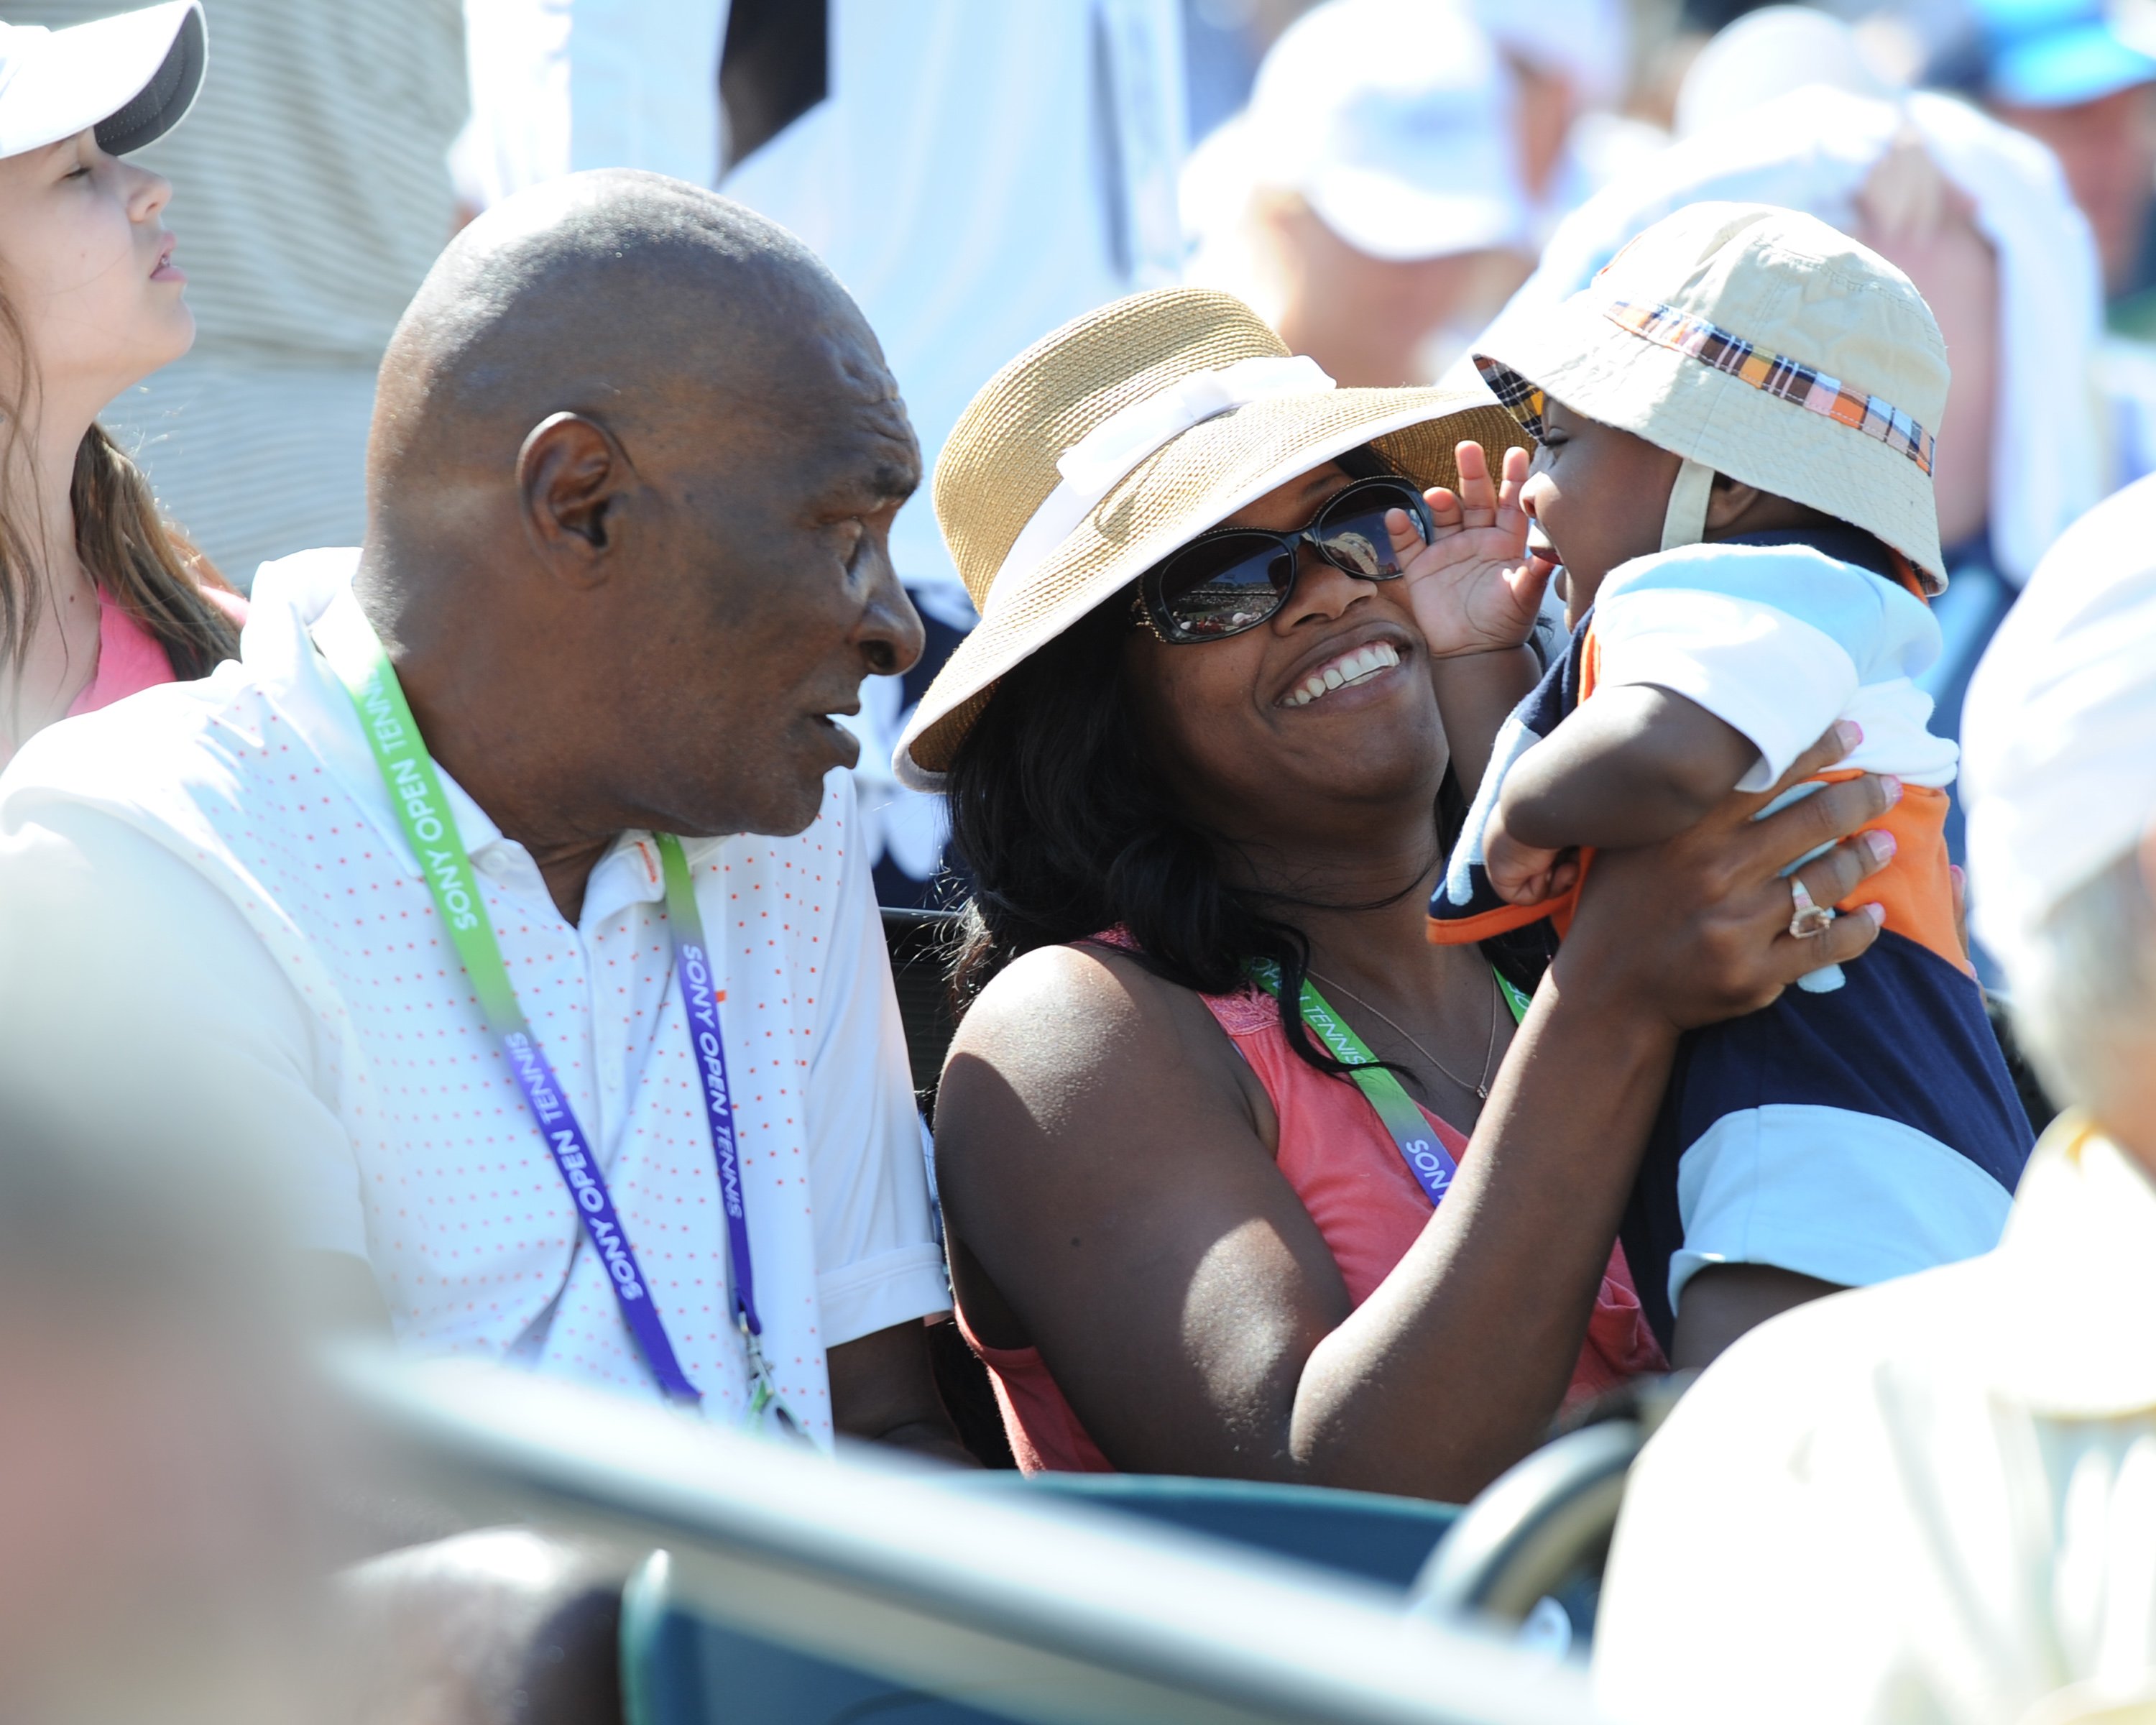 Richard Williams, Lakeisha Williams, Dylan Starr Richard Williams at the Crandon Park Tennis Center on March 21, 2013, Key Biscayne, Florida. | Source: Getty Images